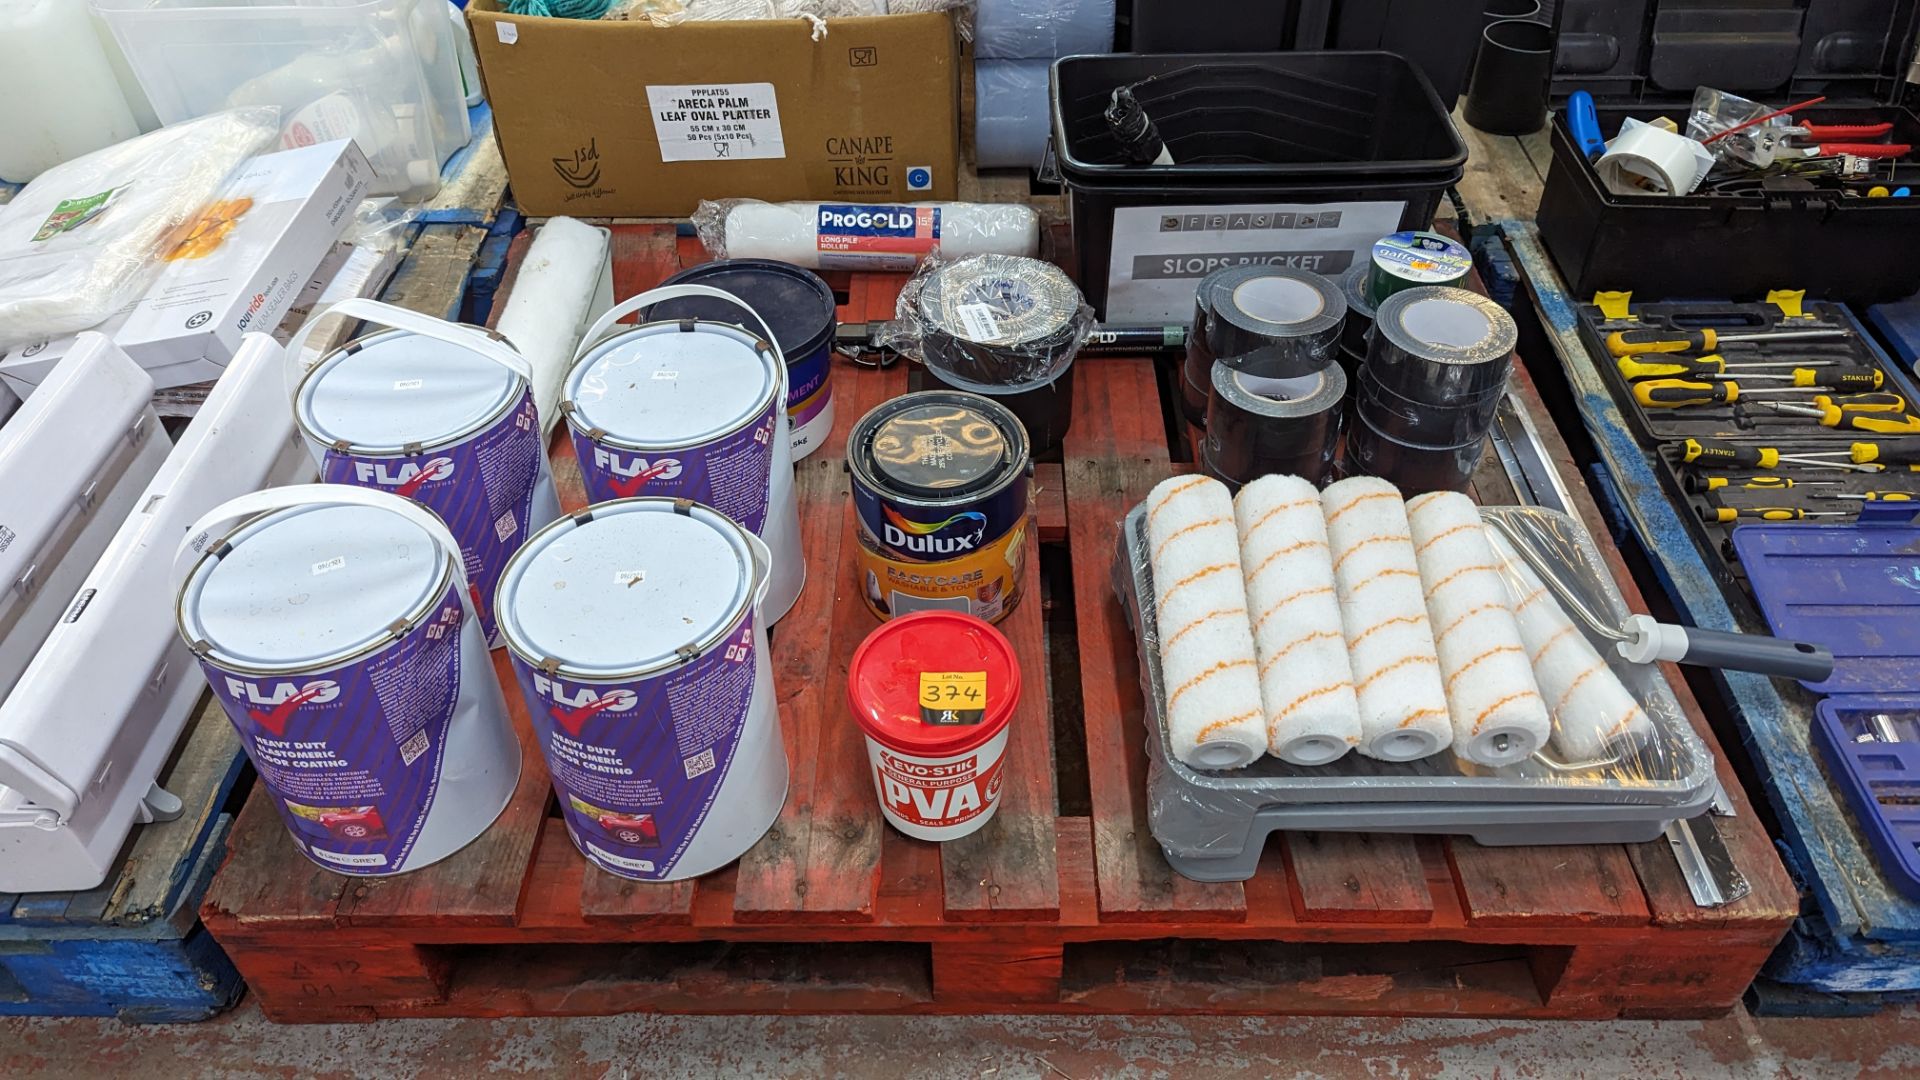 The contents of a pallet of decorating items including paint rollers, paint, tape & more - Image 2 of 10